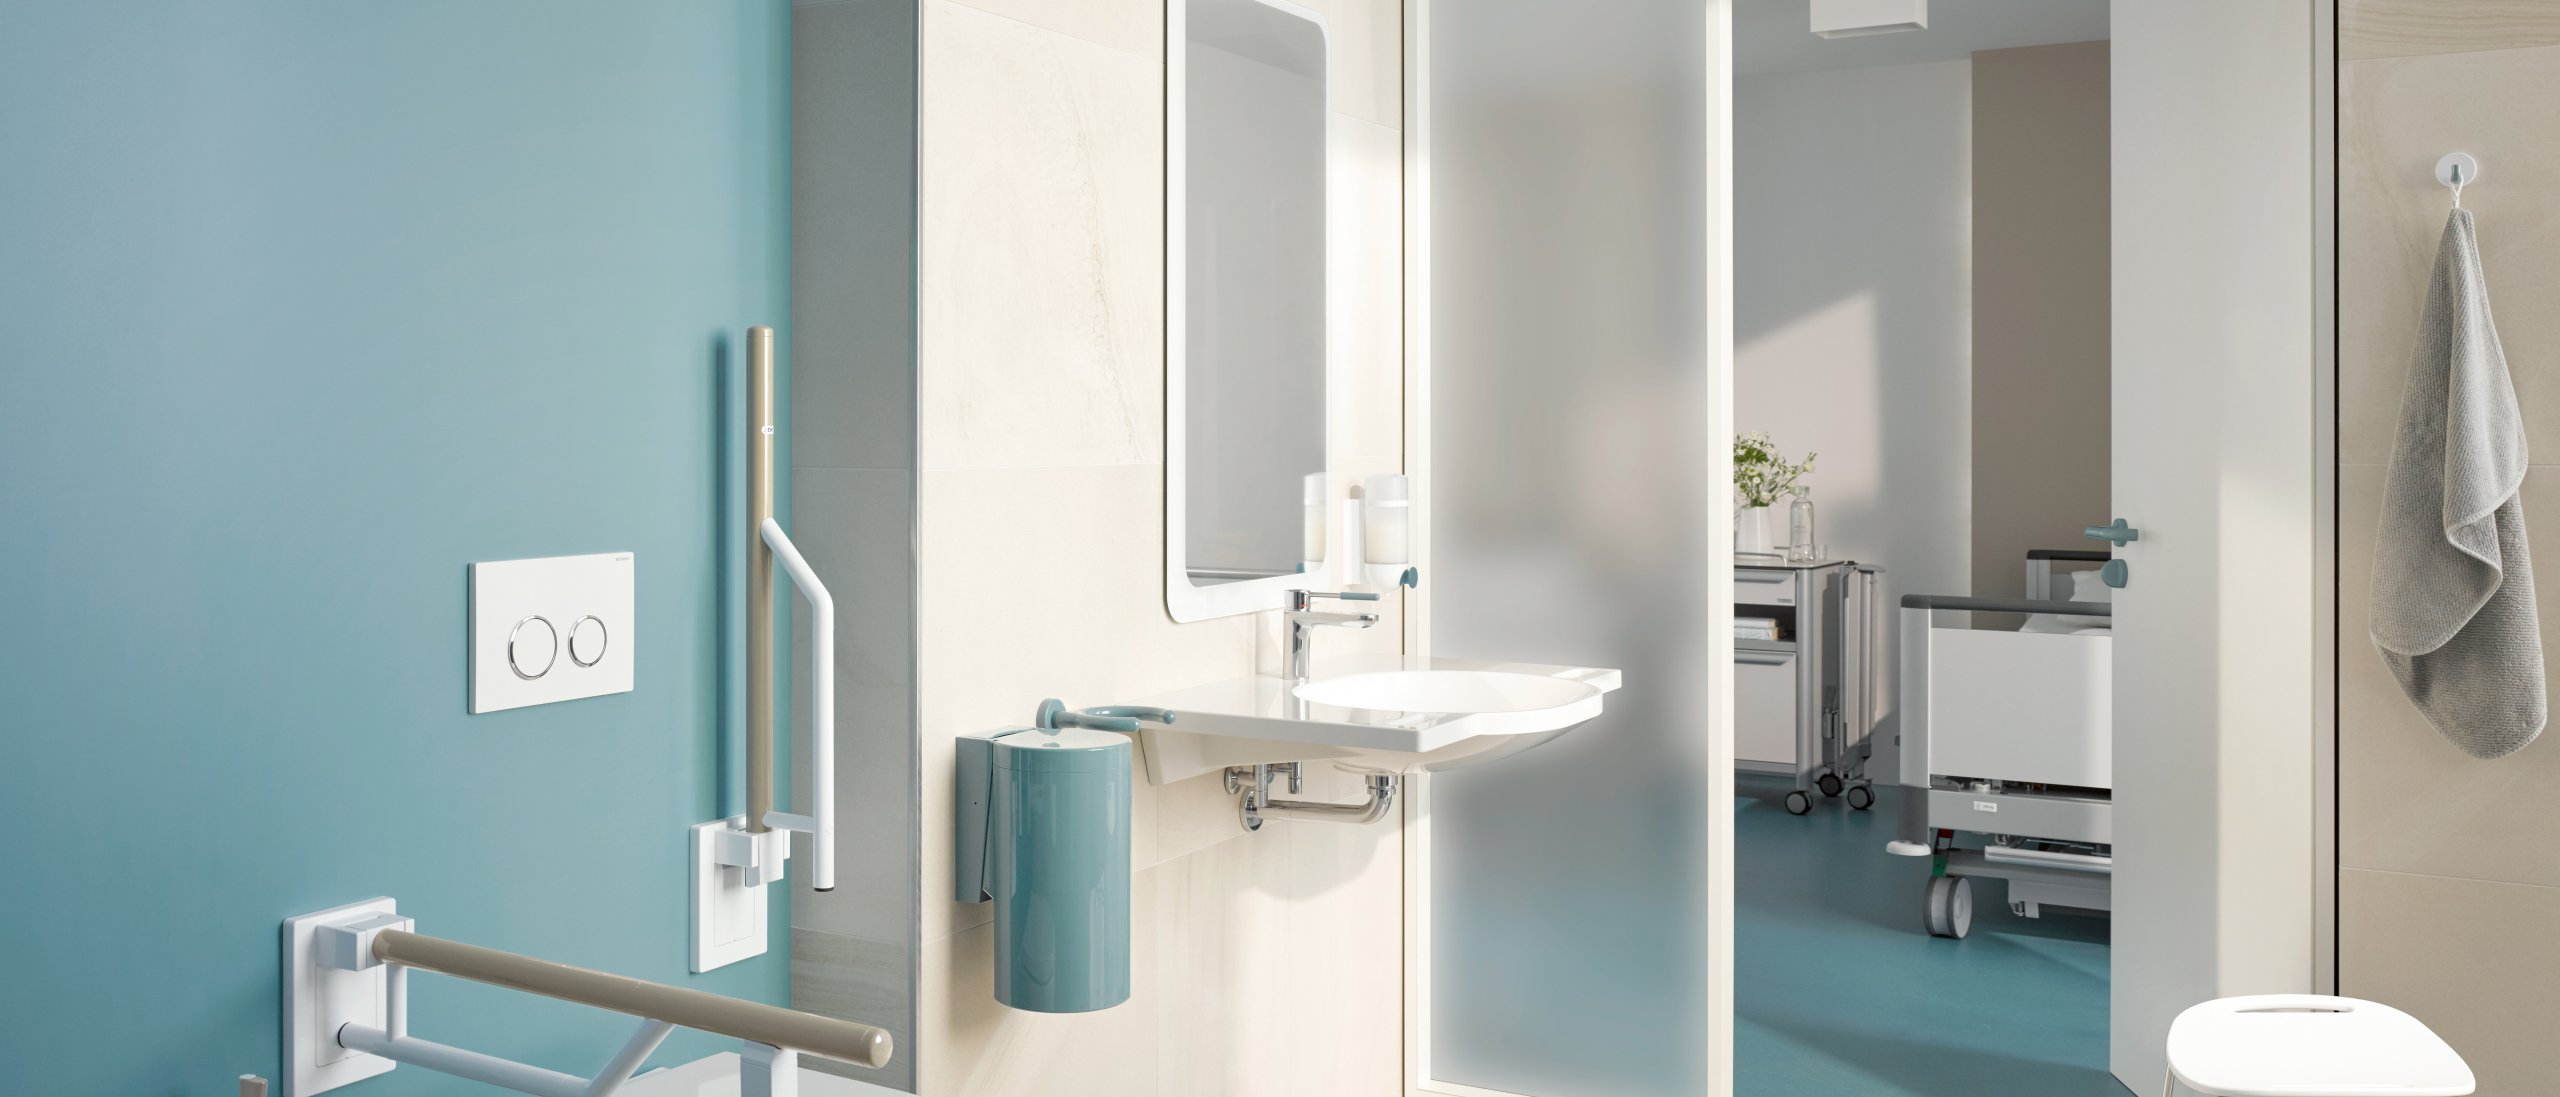 Barrier-free patient bathroom equipped with white and blue sanitary accessories